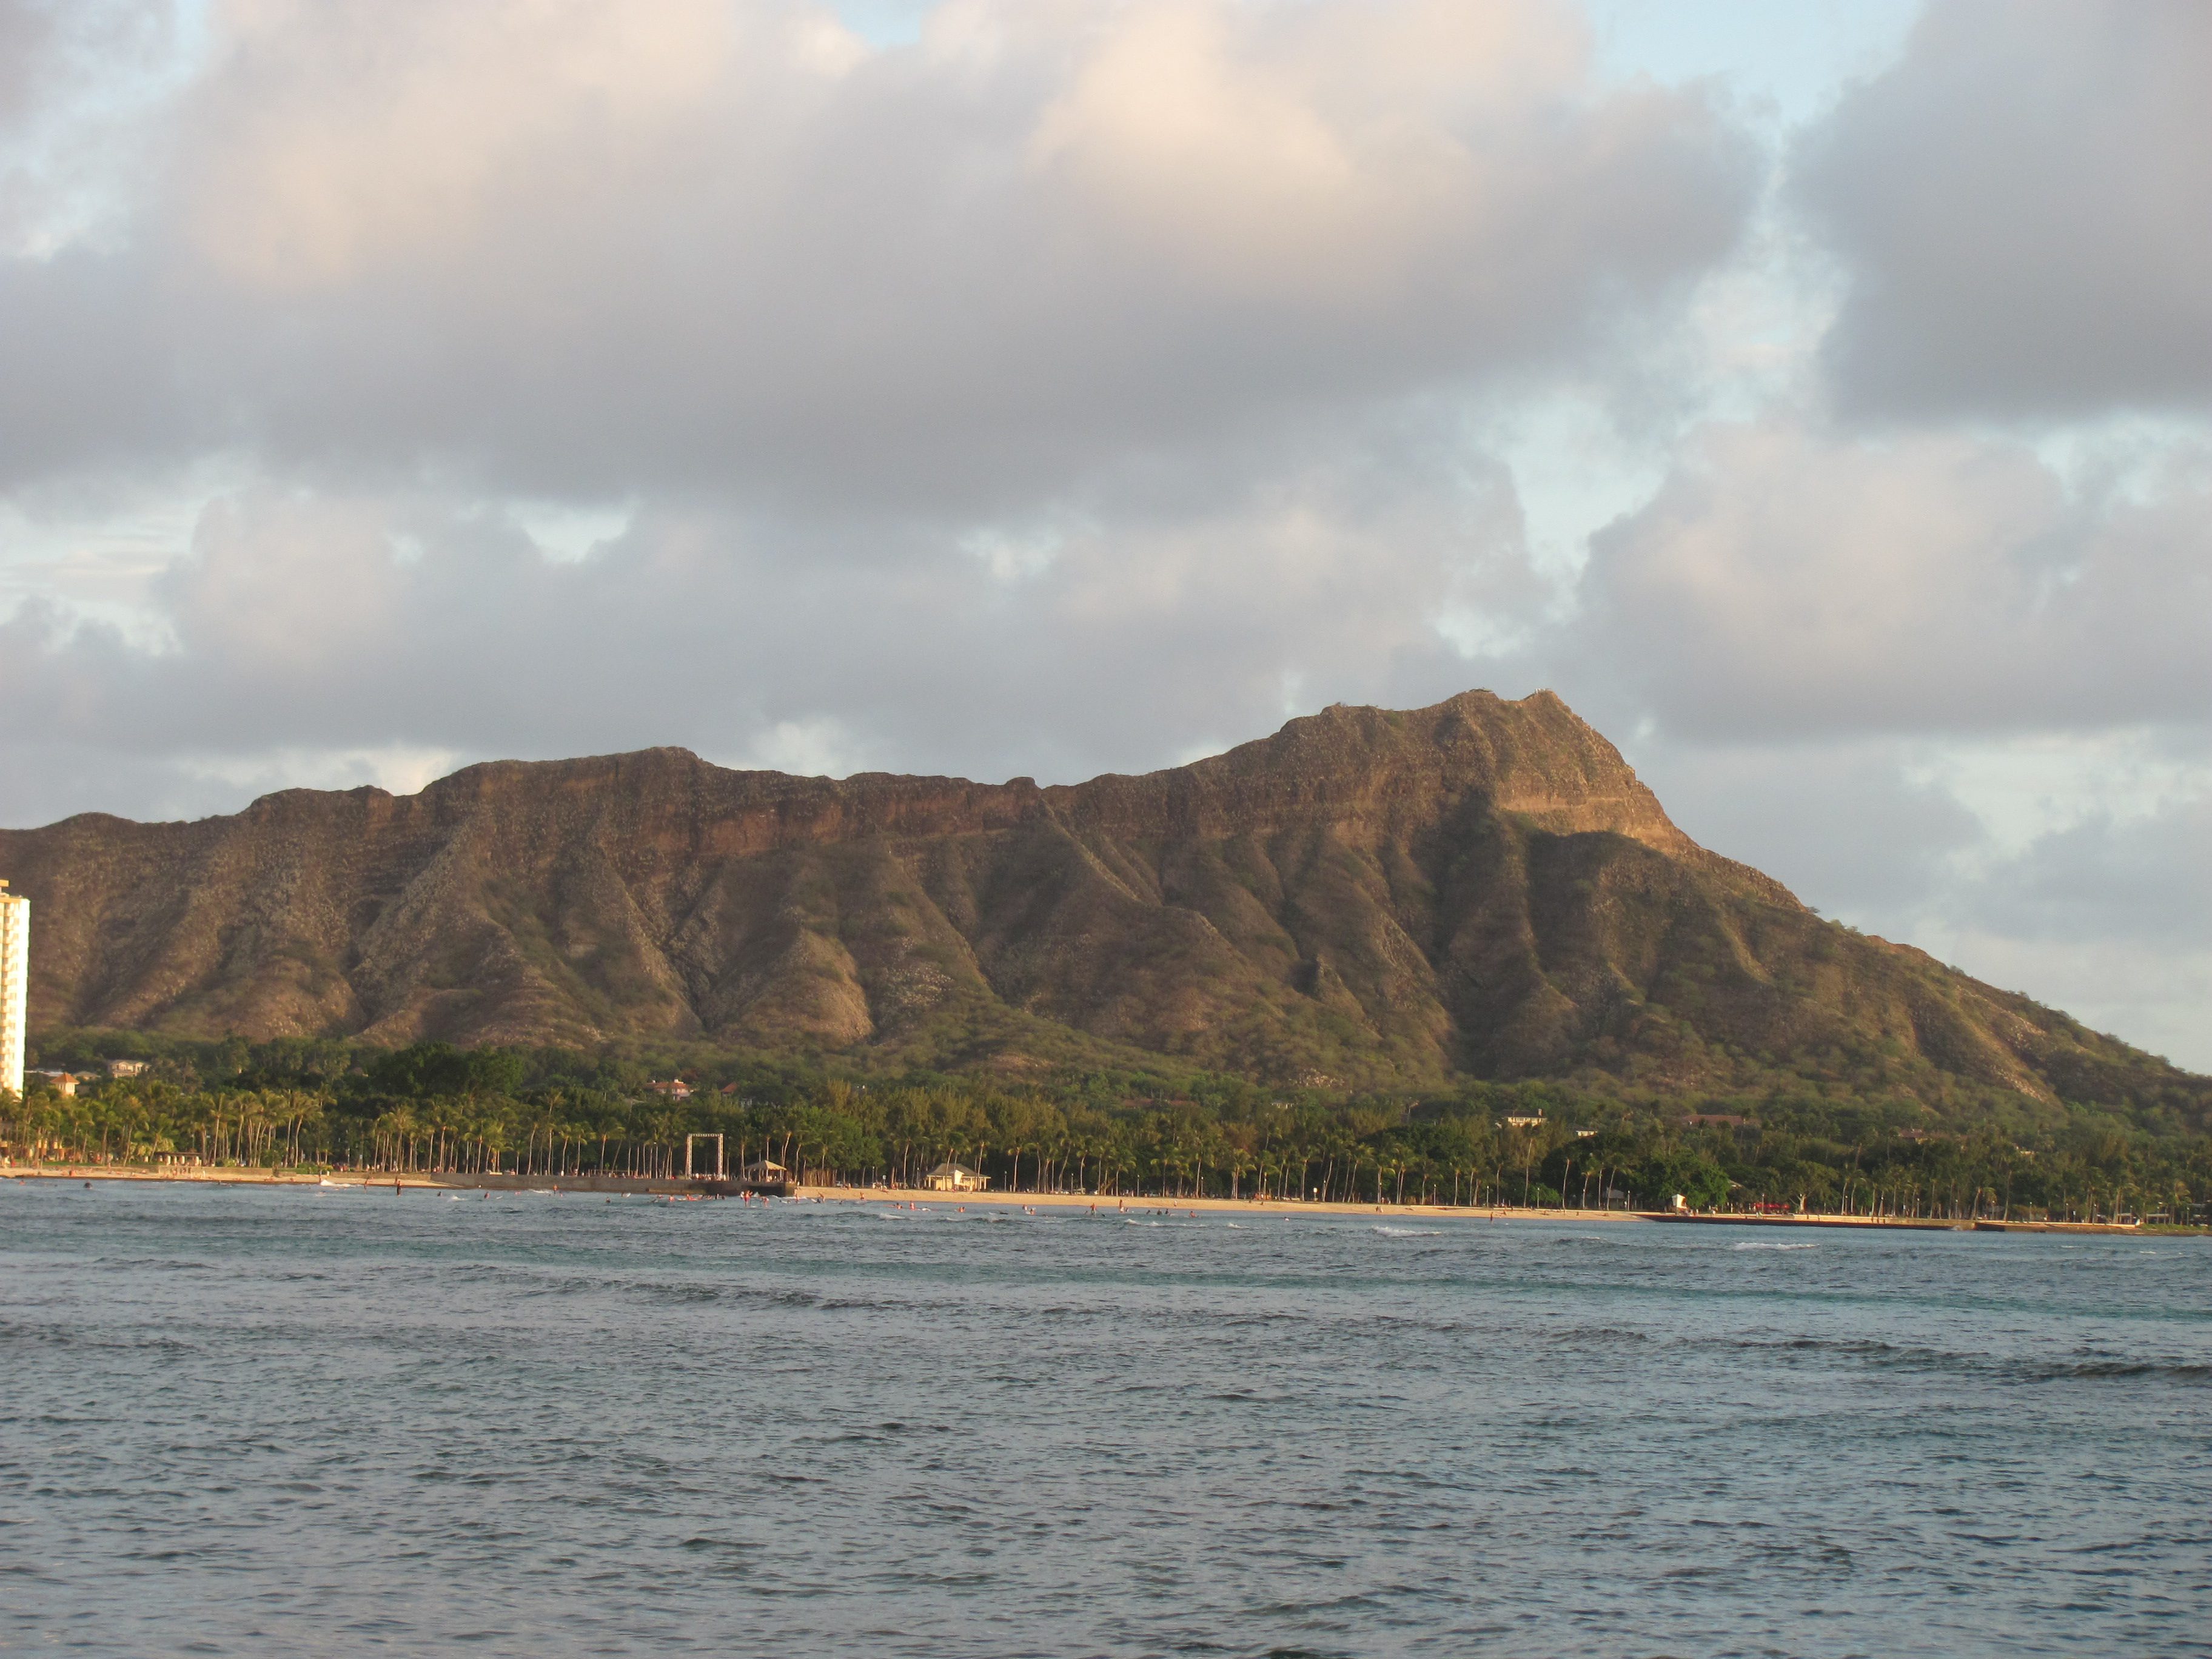 A famous volcanic crater, Diamond Head